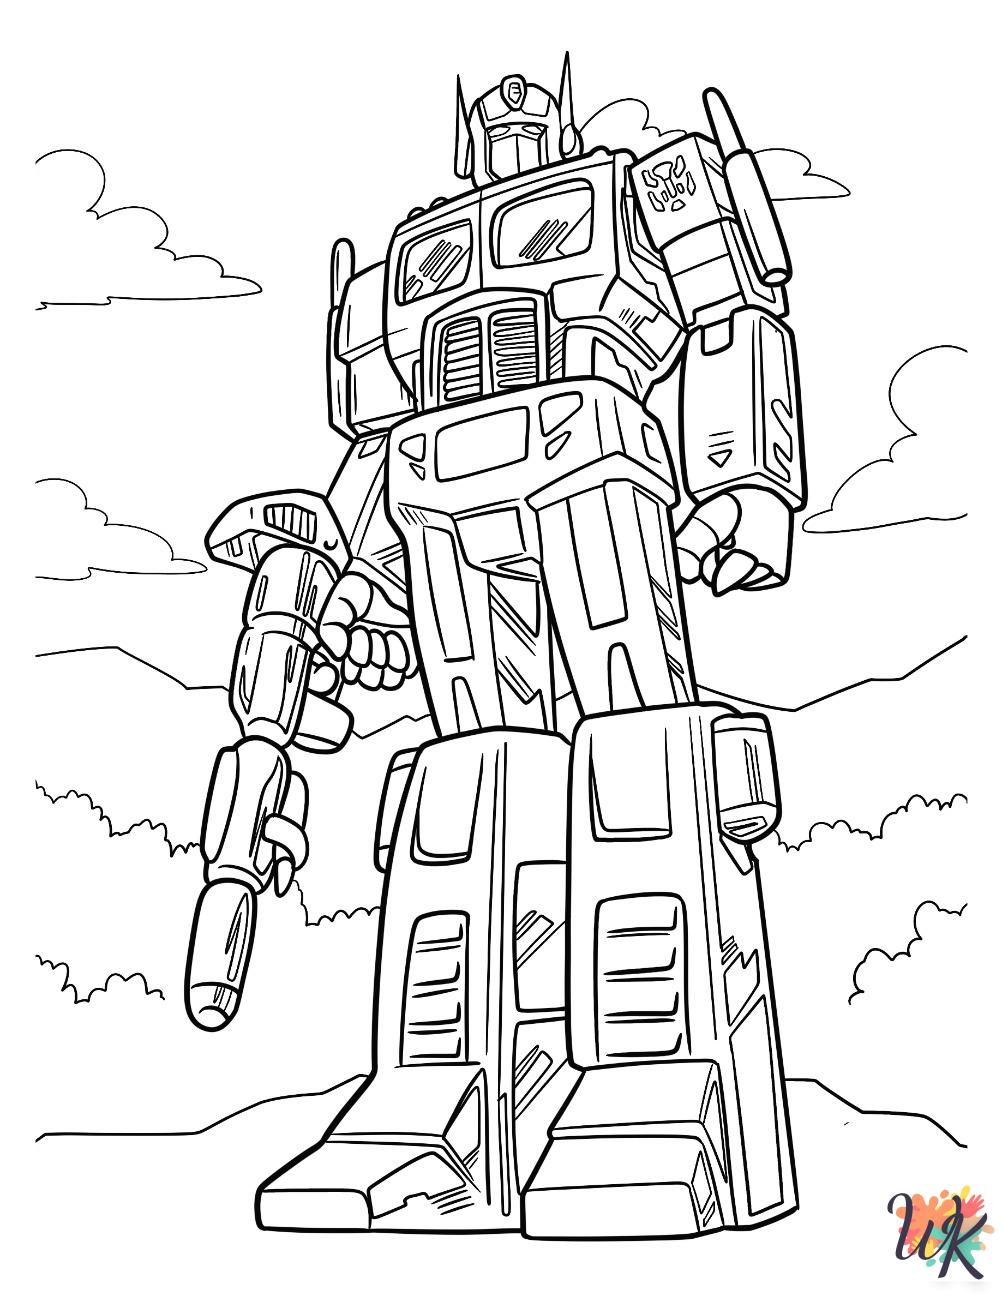 Optimus Prime coloring pages free